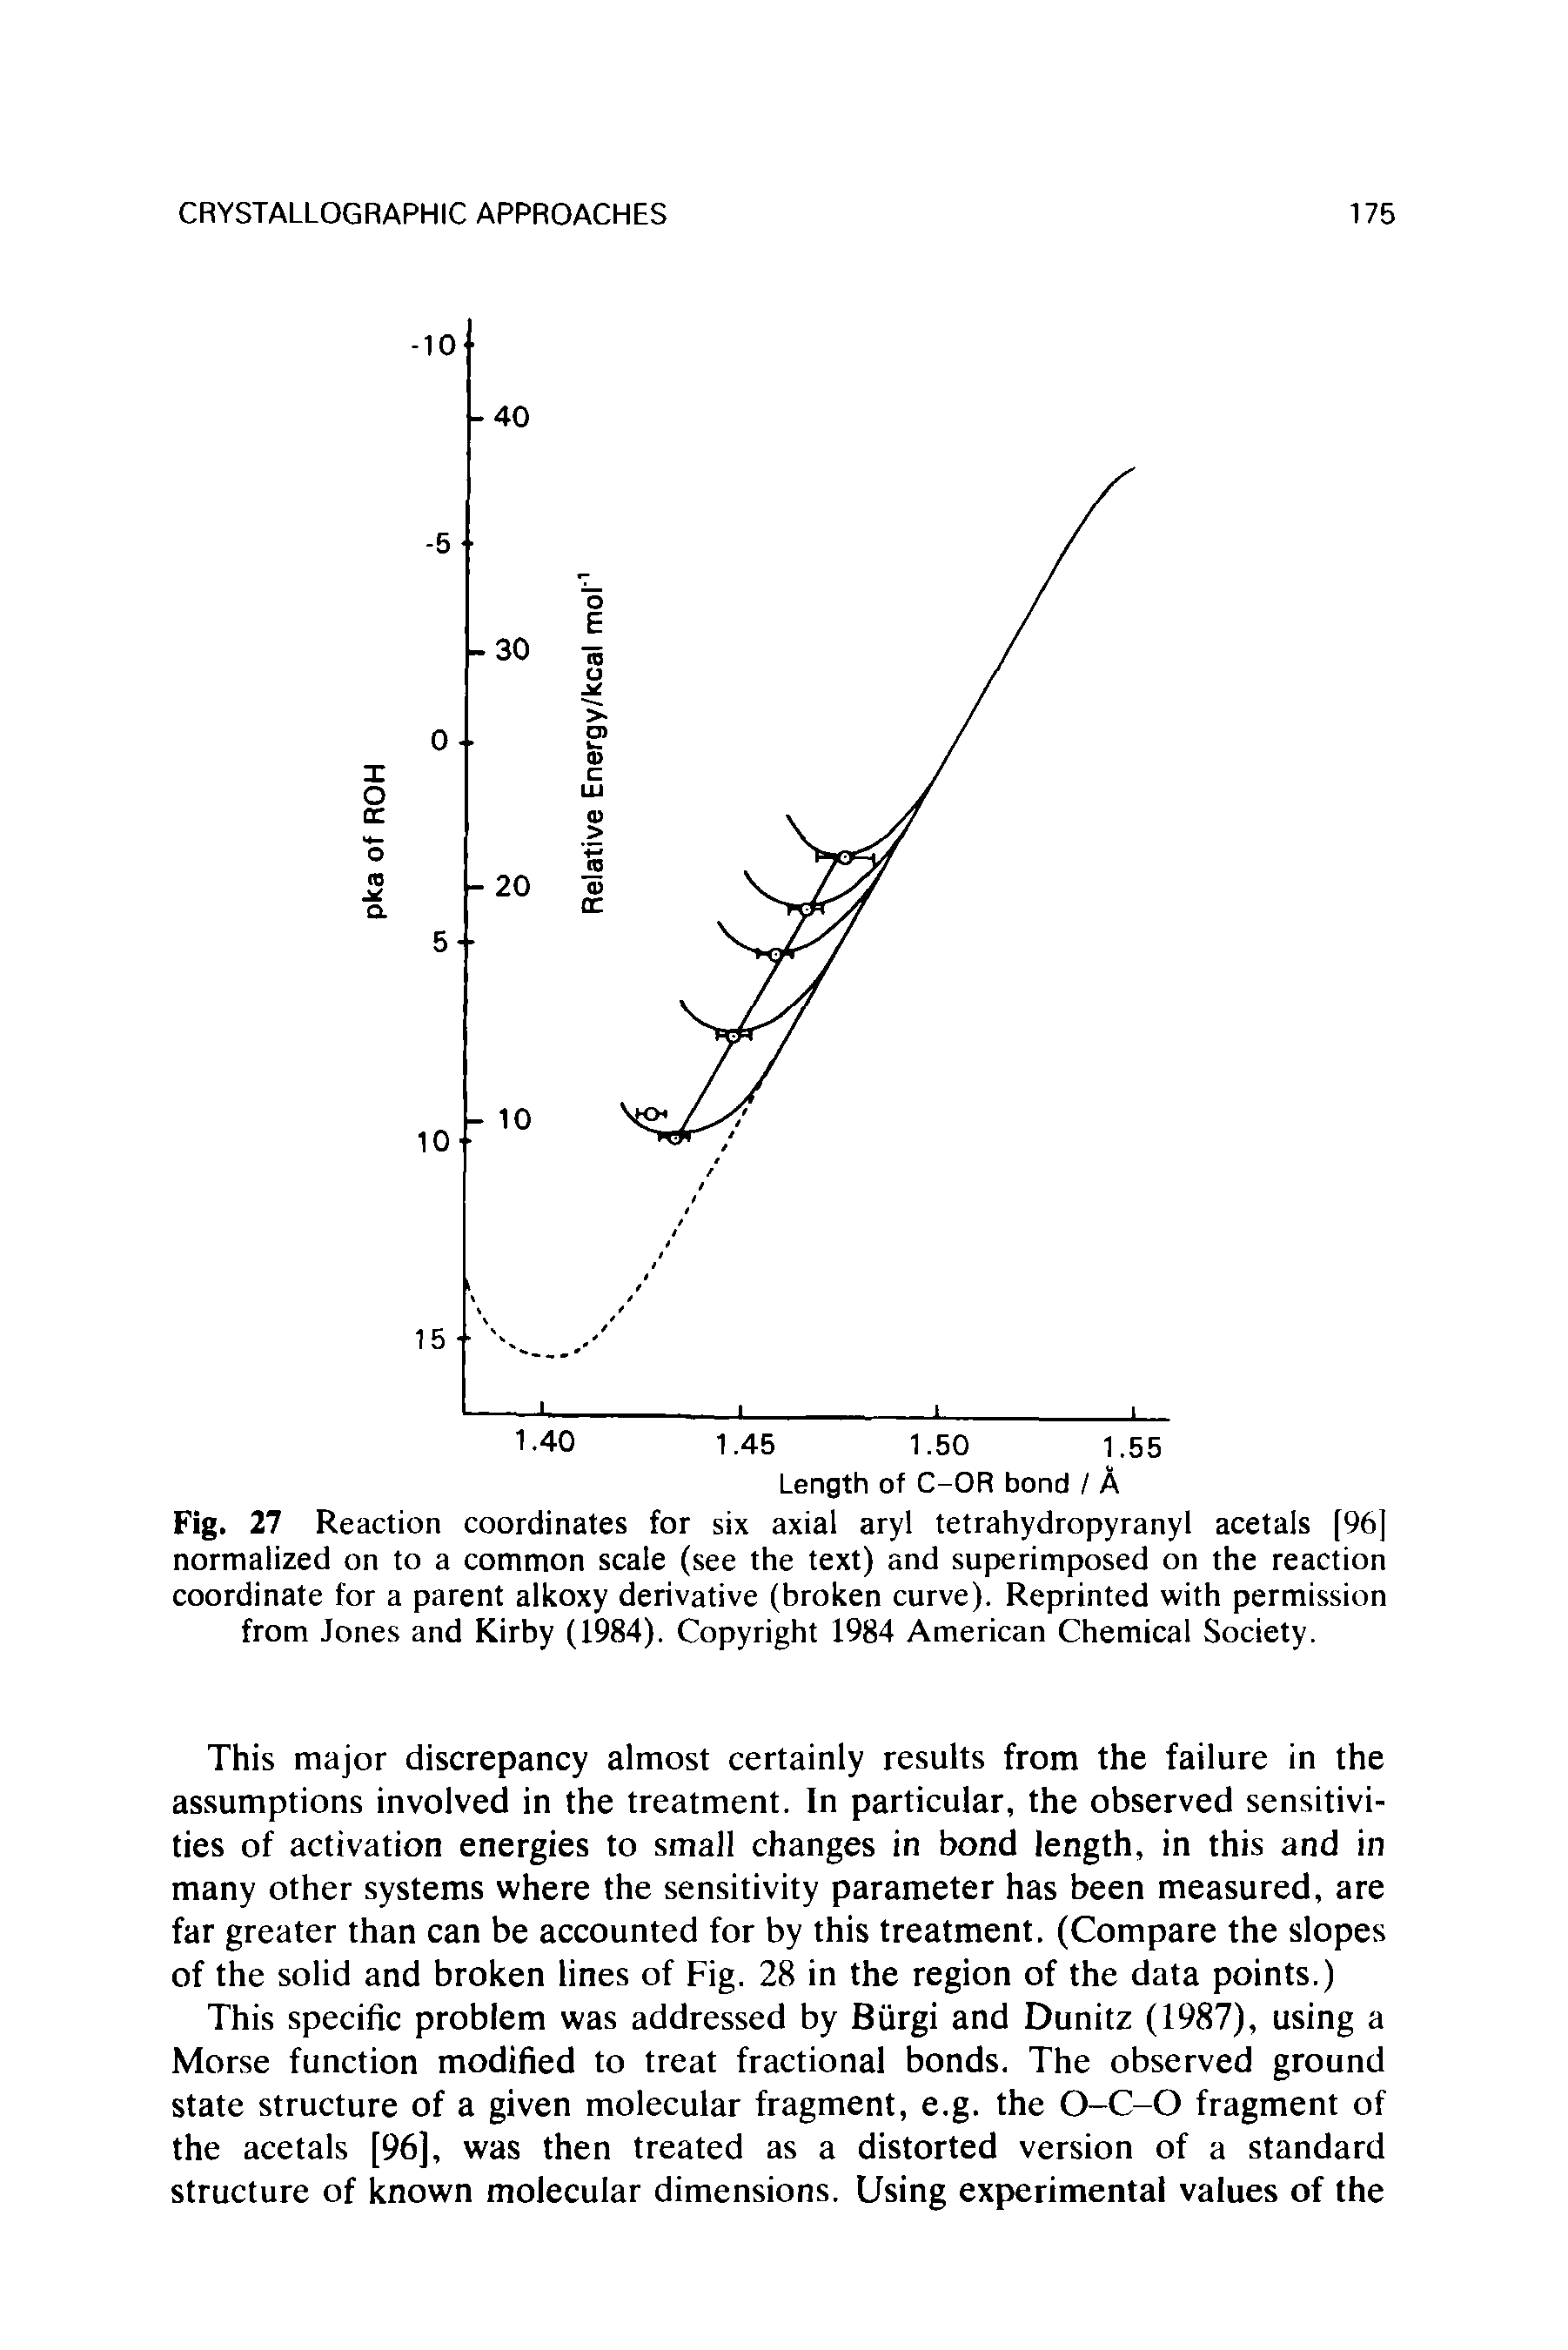 Fig. 27 Reaction coordinates for six axial aryl tetrahydropyranyl acetals [96] normalized on to a common scale (see the text) and superimposed on the reaction coordinate for a parent alkoxy derivative (broken curve). Reprinted with permission from Jones and Kirby (1984). Copyright 1984 American Chemical Society.